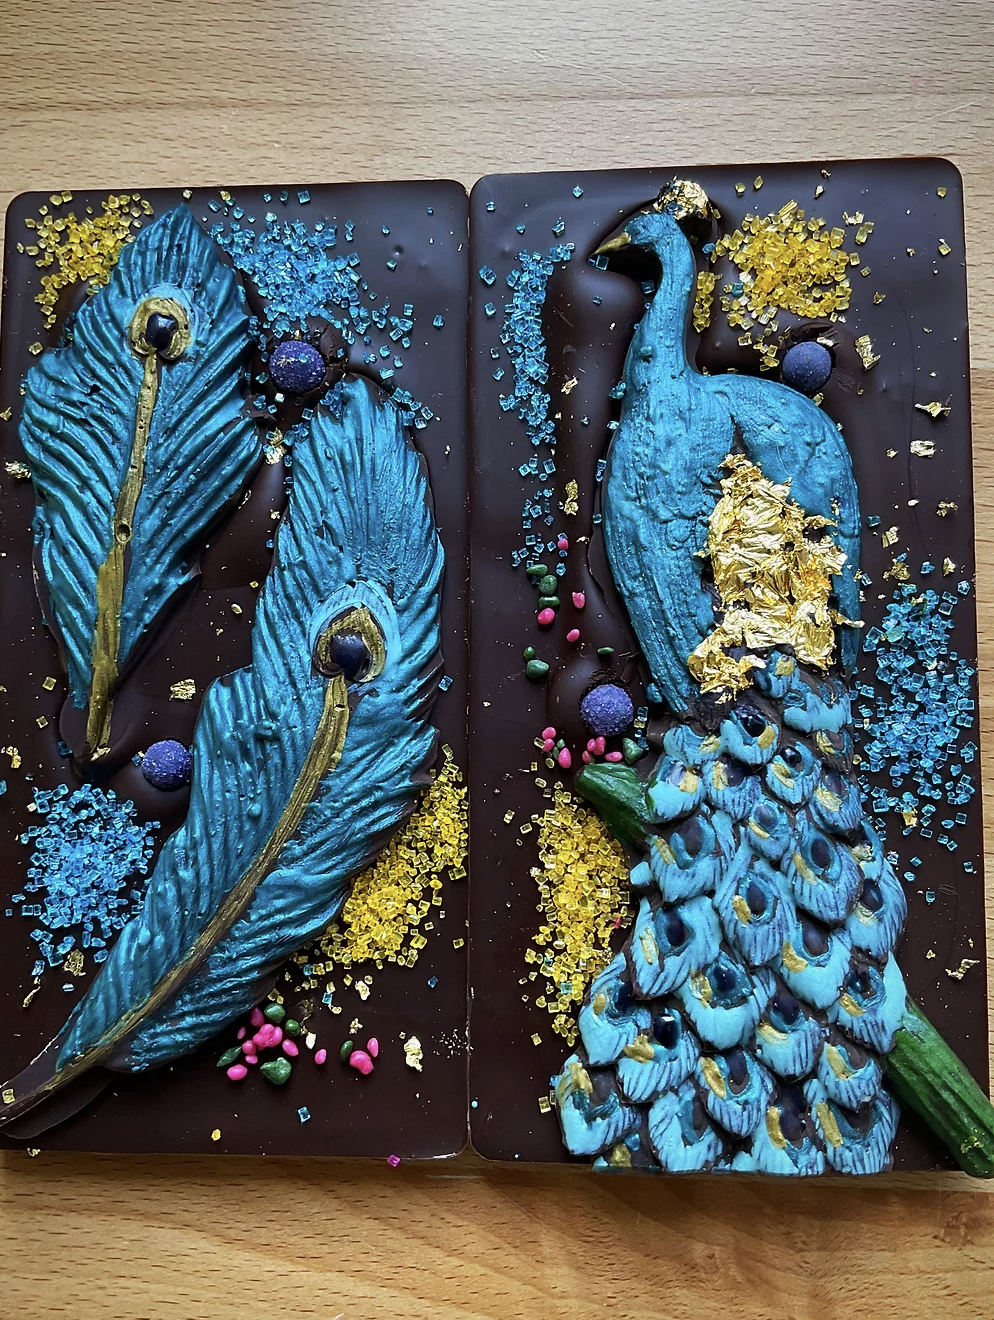 Two dark chocolate bars with an iridescent blue peacock design. 